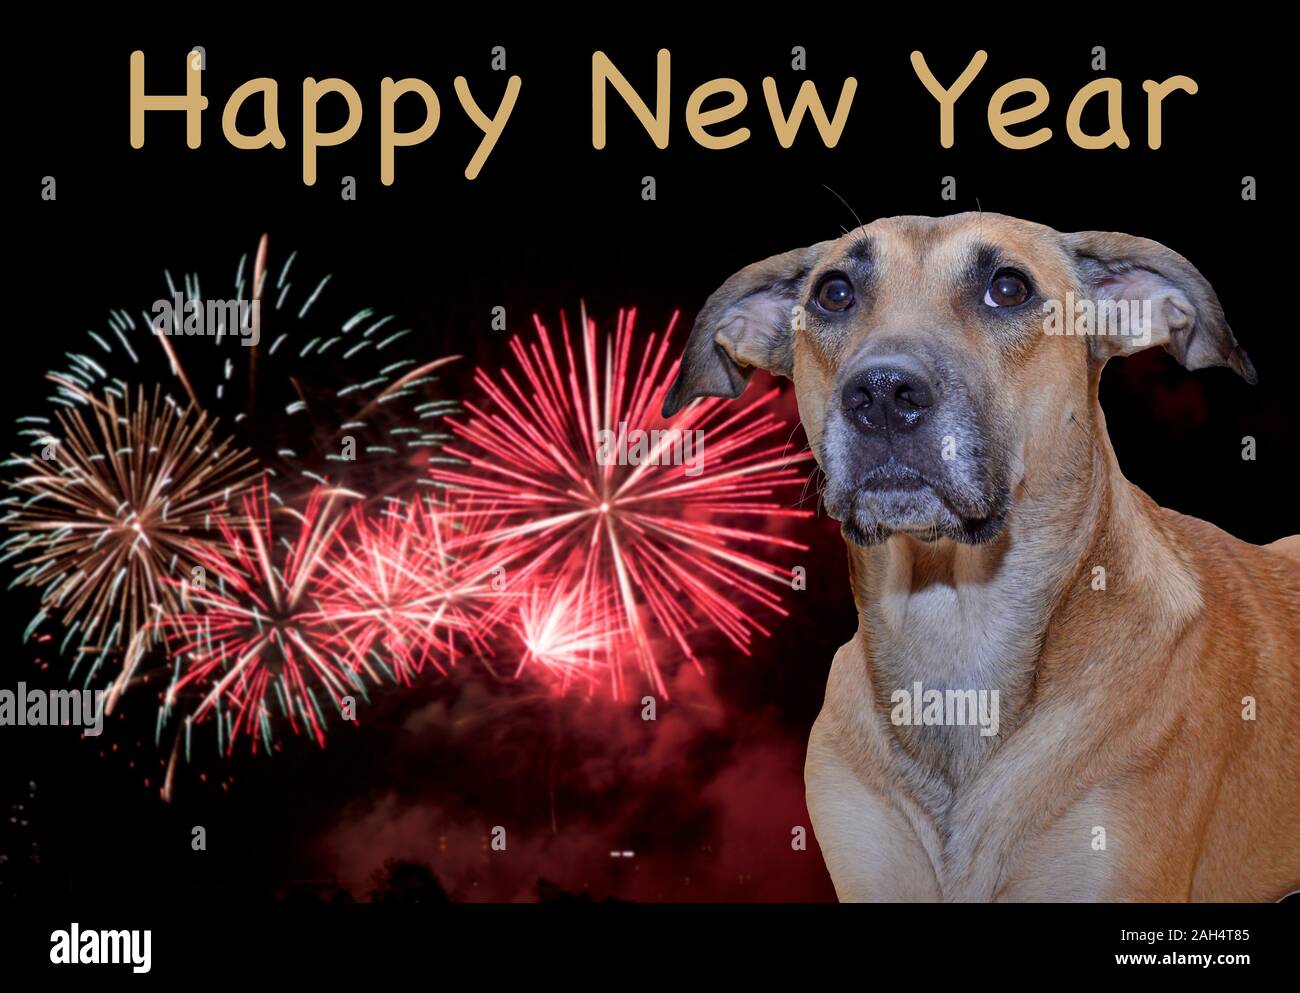 Hybrid Dog poses in front of fireworks saying Happy New Year. Stock Photo